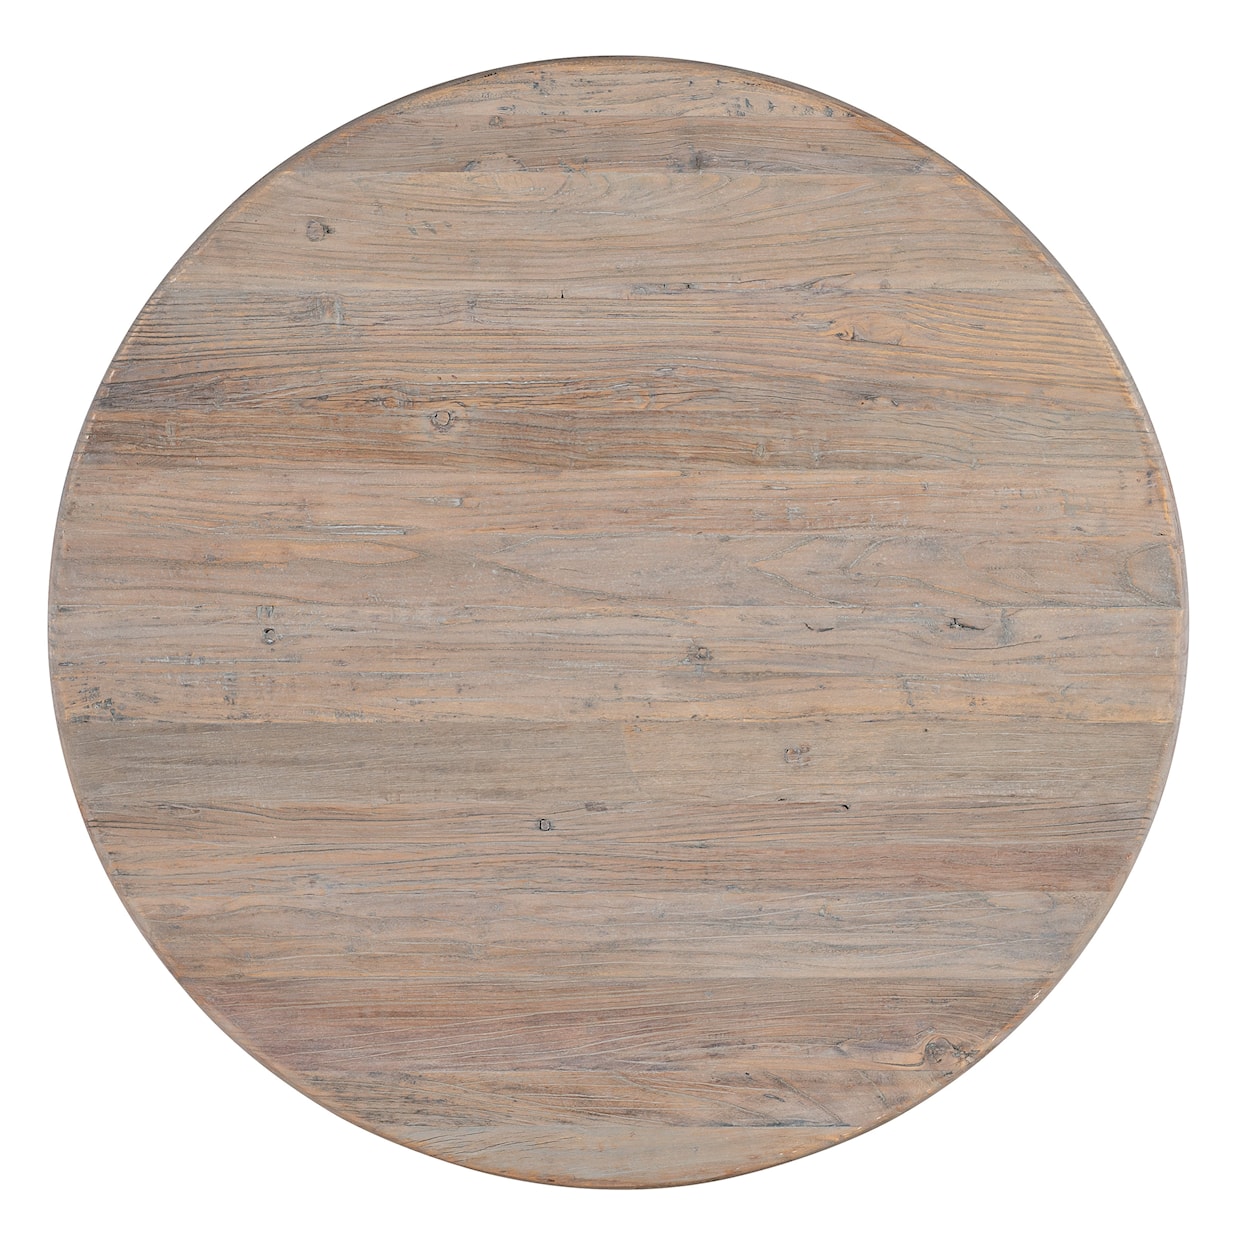 BOBO Intriguing Objects BOBO Intriguing Objects Bordeaux Reclaimed Elm Round Dining Table